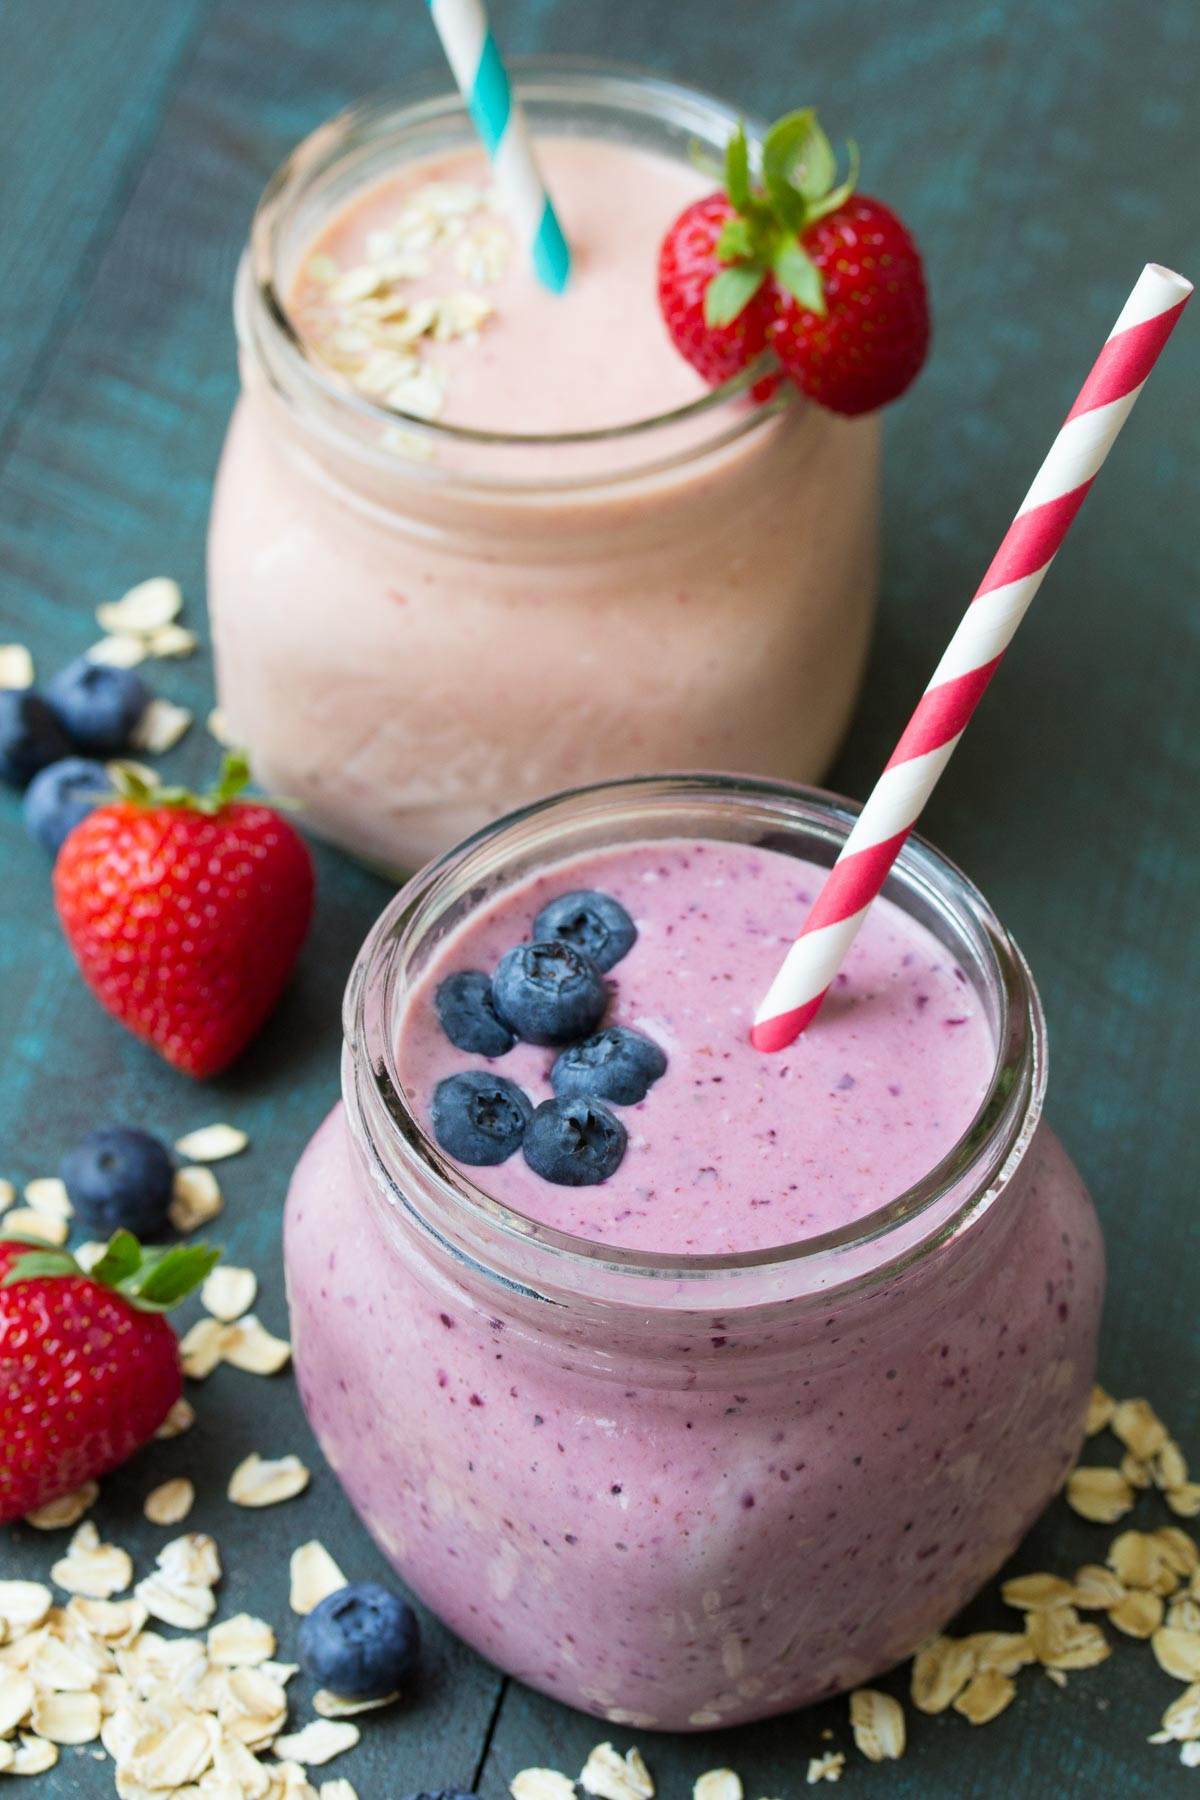 Healthy Smoothies for Kids Beautiful Oatmeal Breakfast Smoothie My Kids Favorite